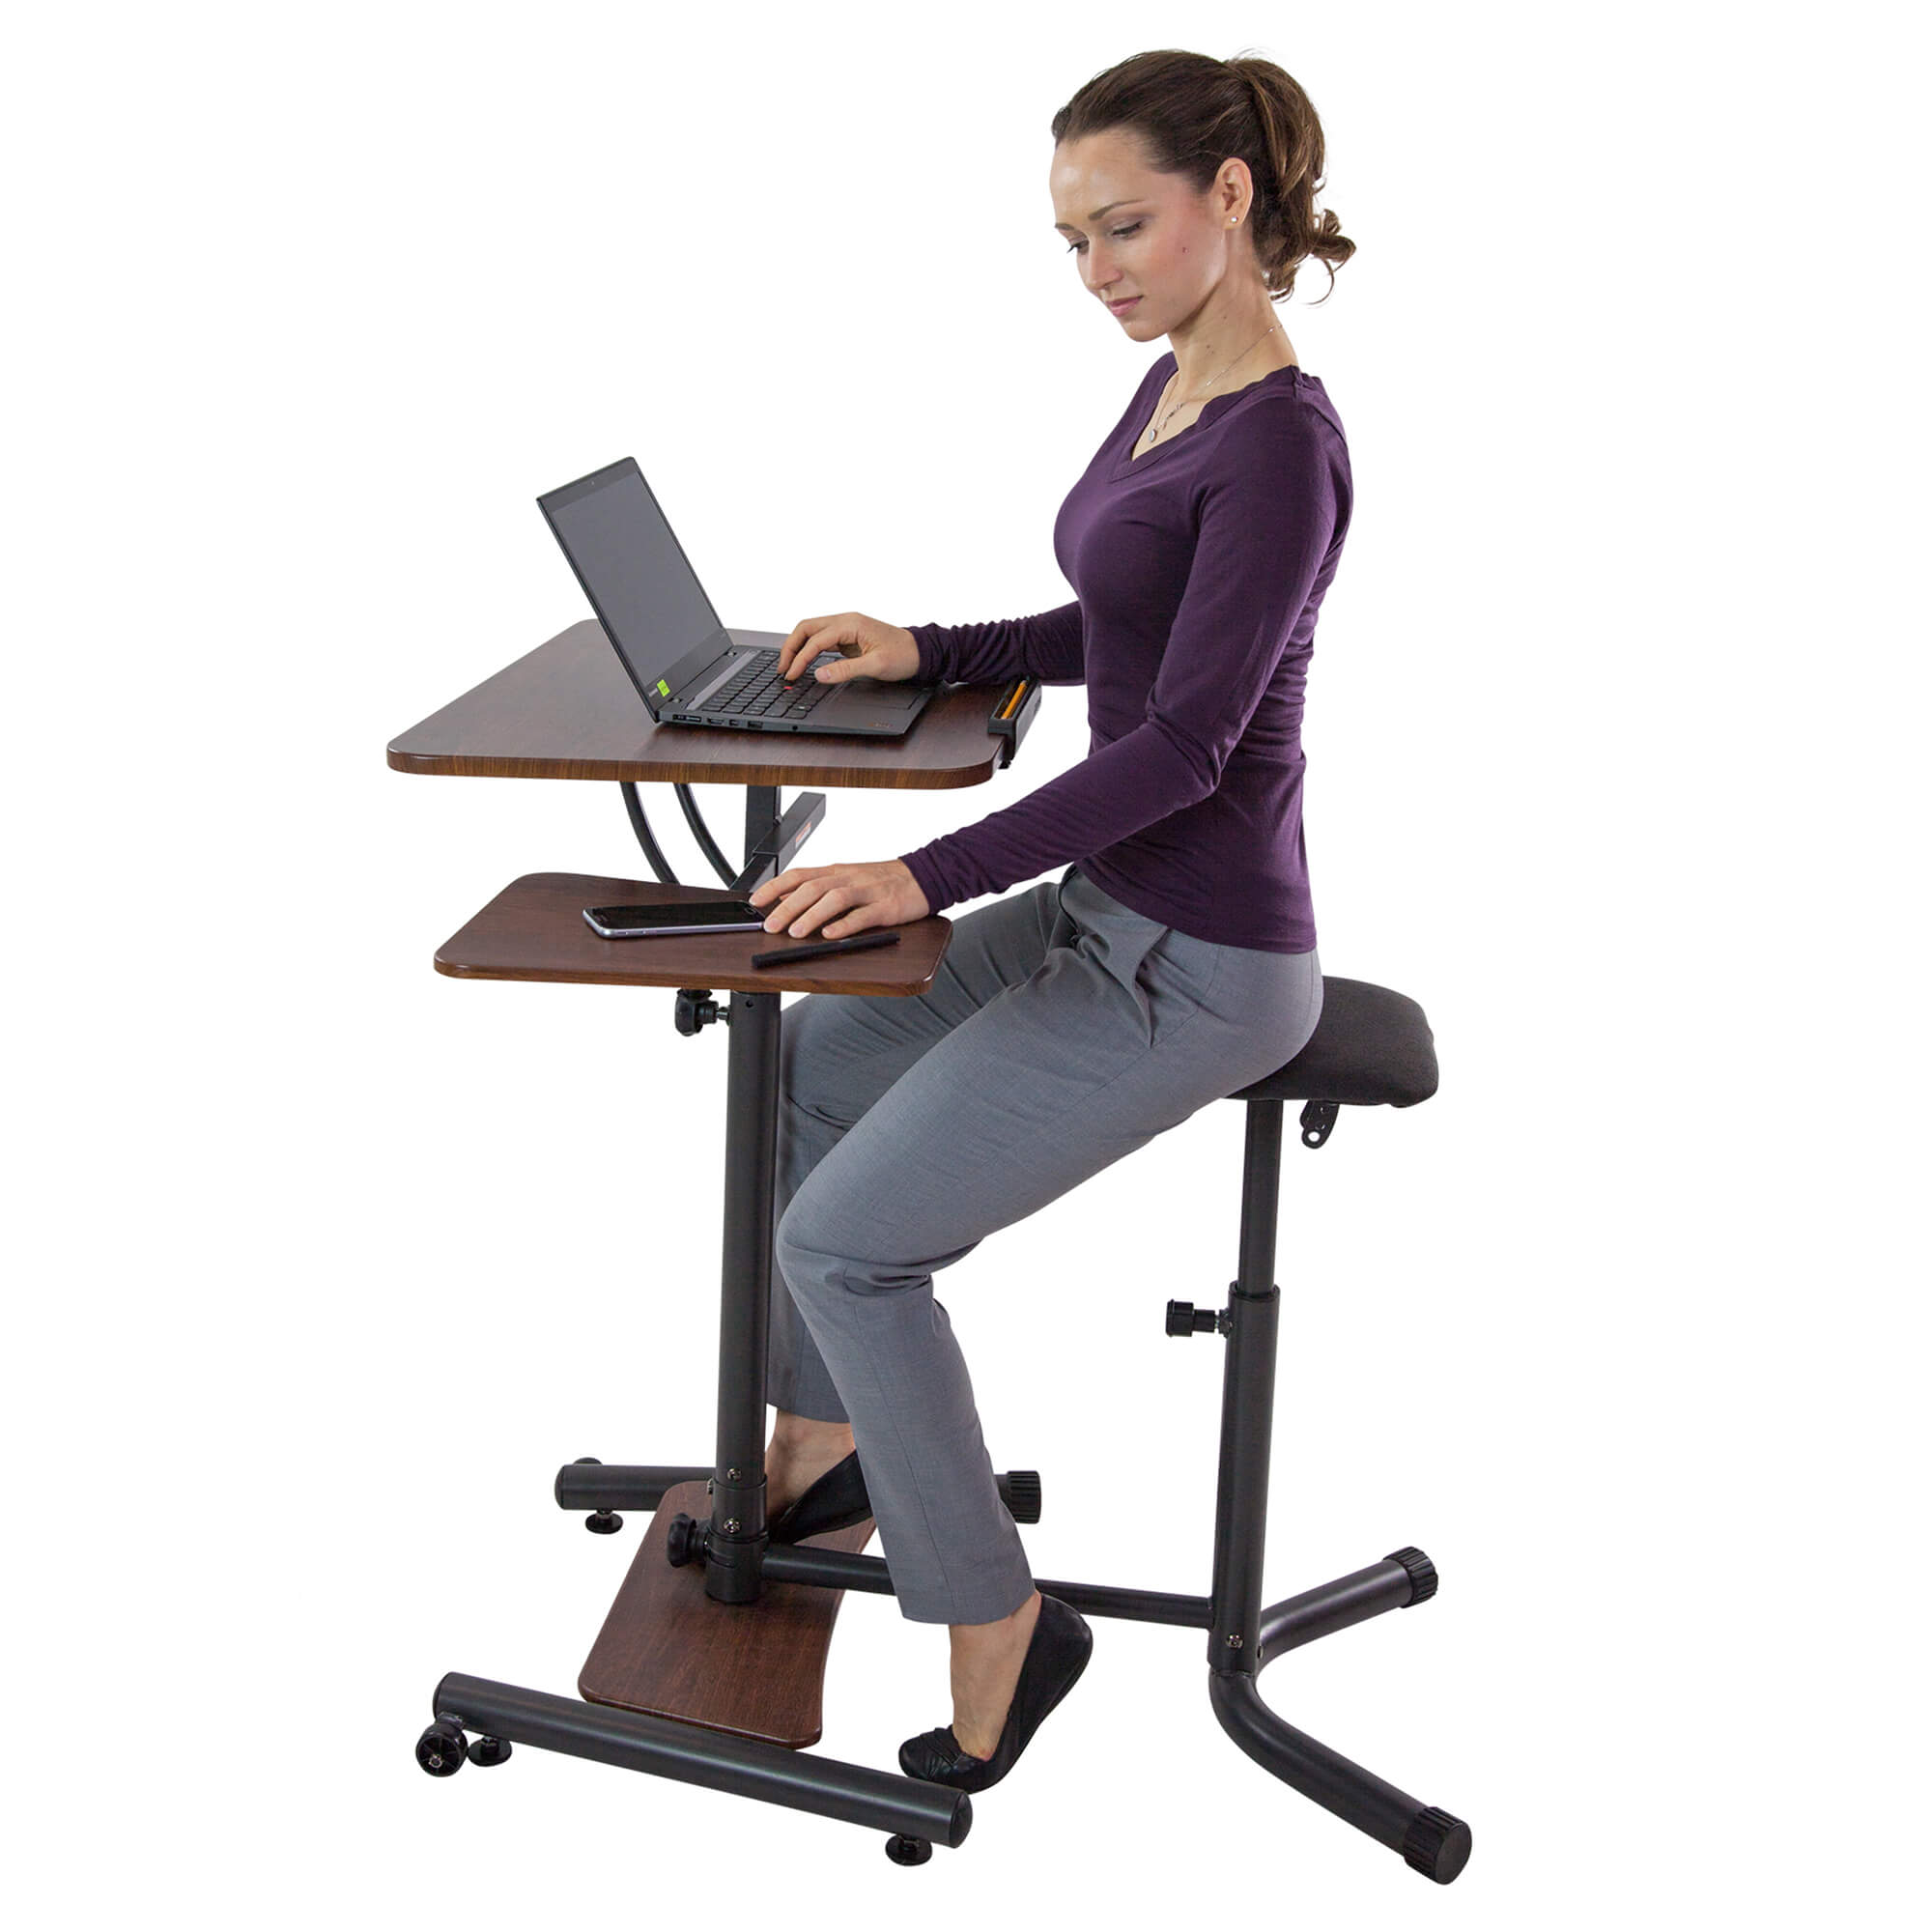 Teeter Sit-Stand Desk - Adjustable Height Ergonomic Workstation with Stool, Side Table, and Foot Platform.